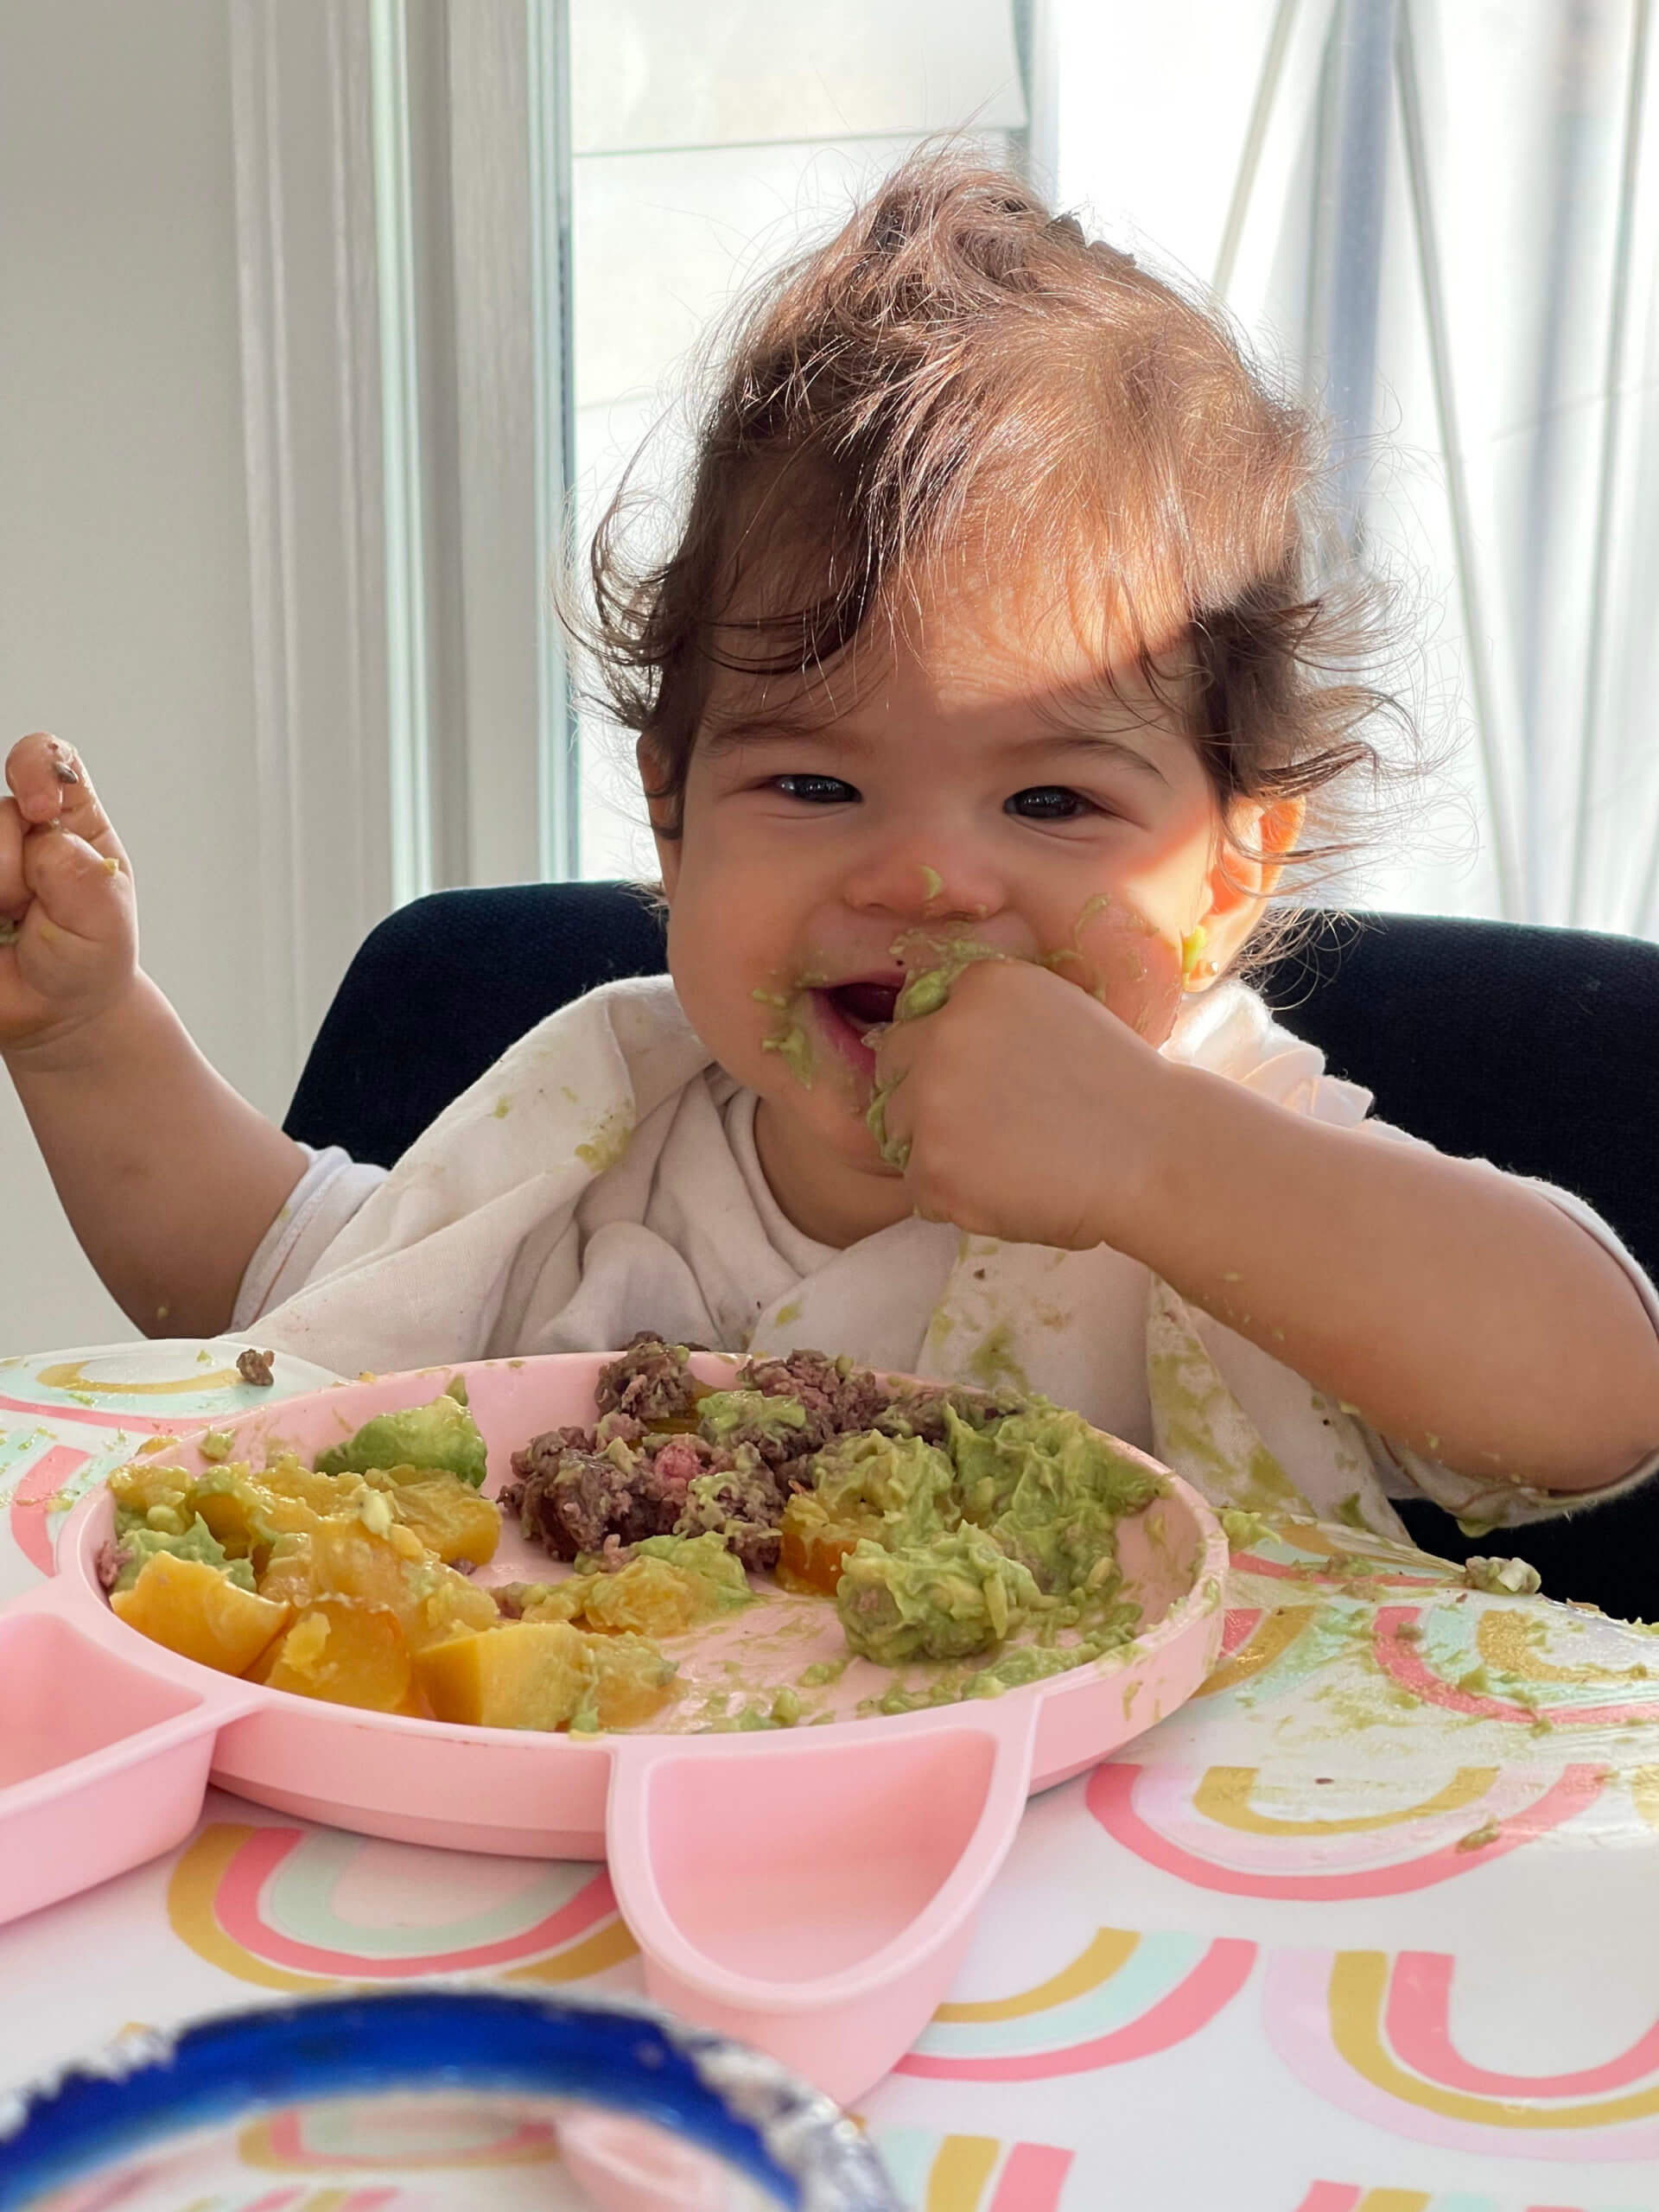 My baby niece is thriving on an animal-based diet.